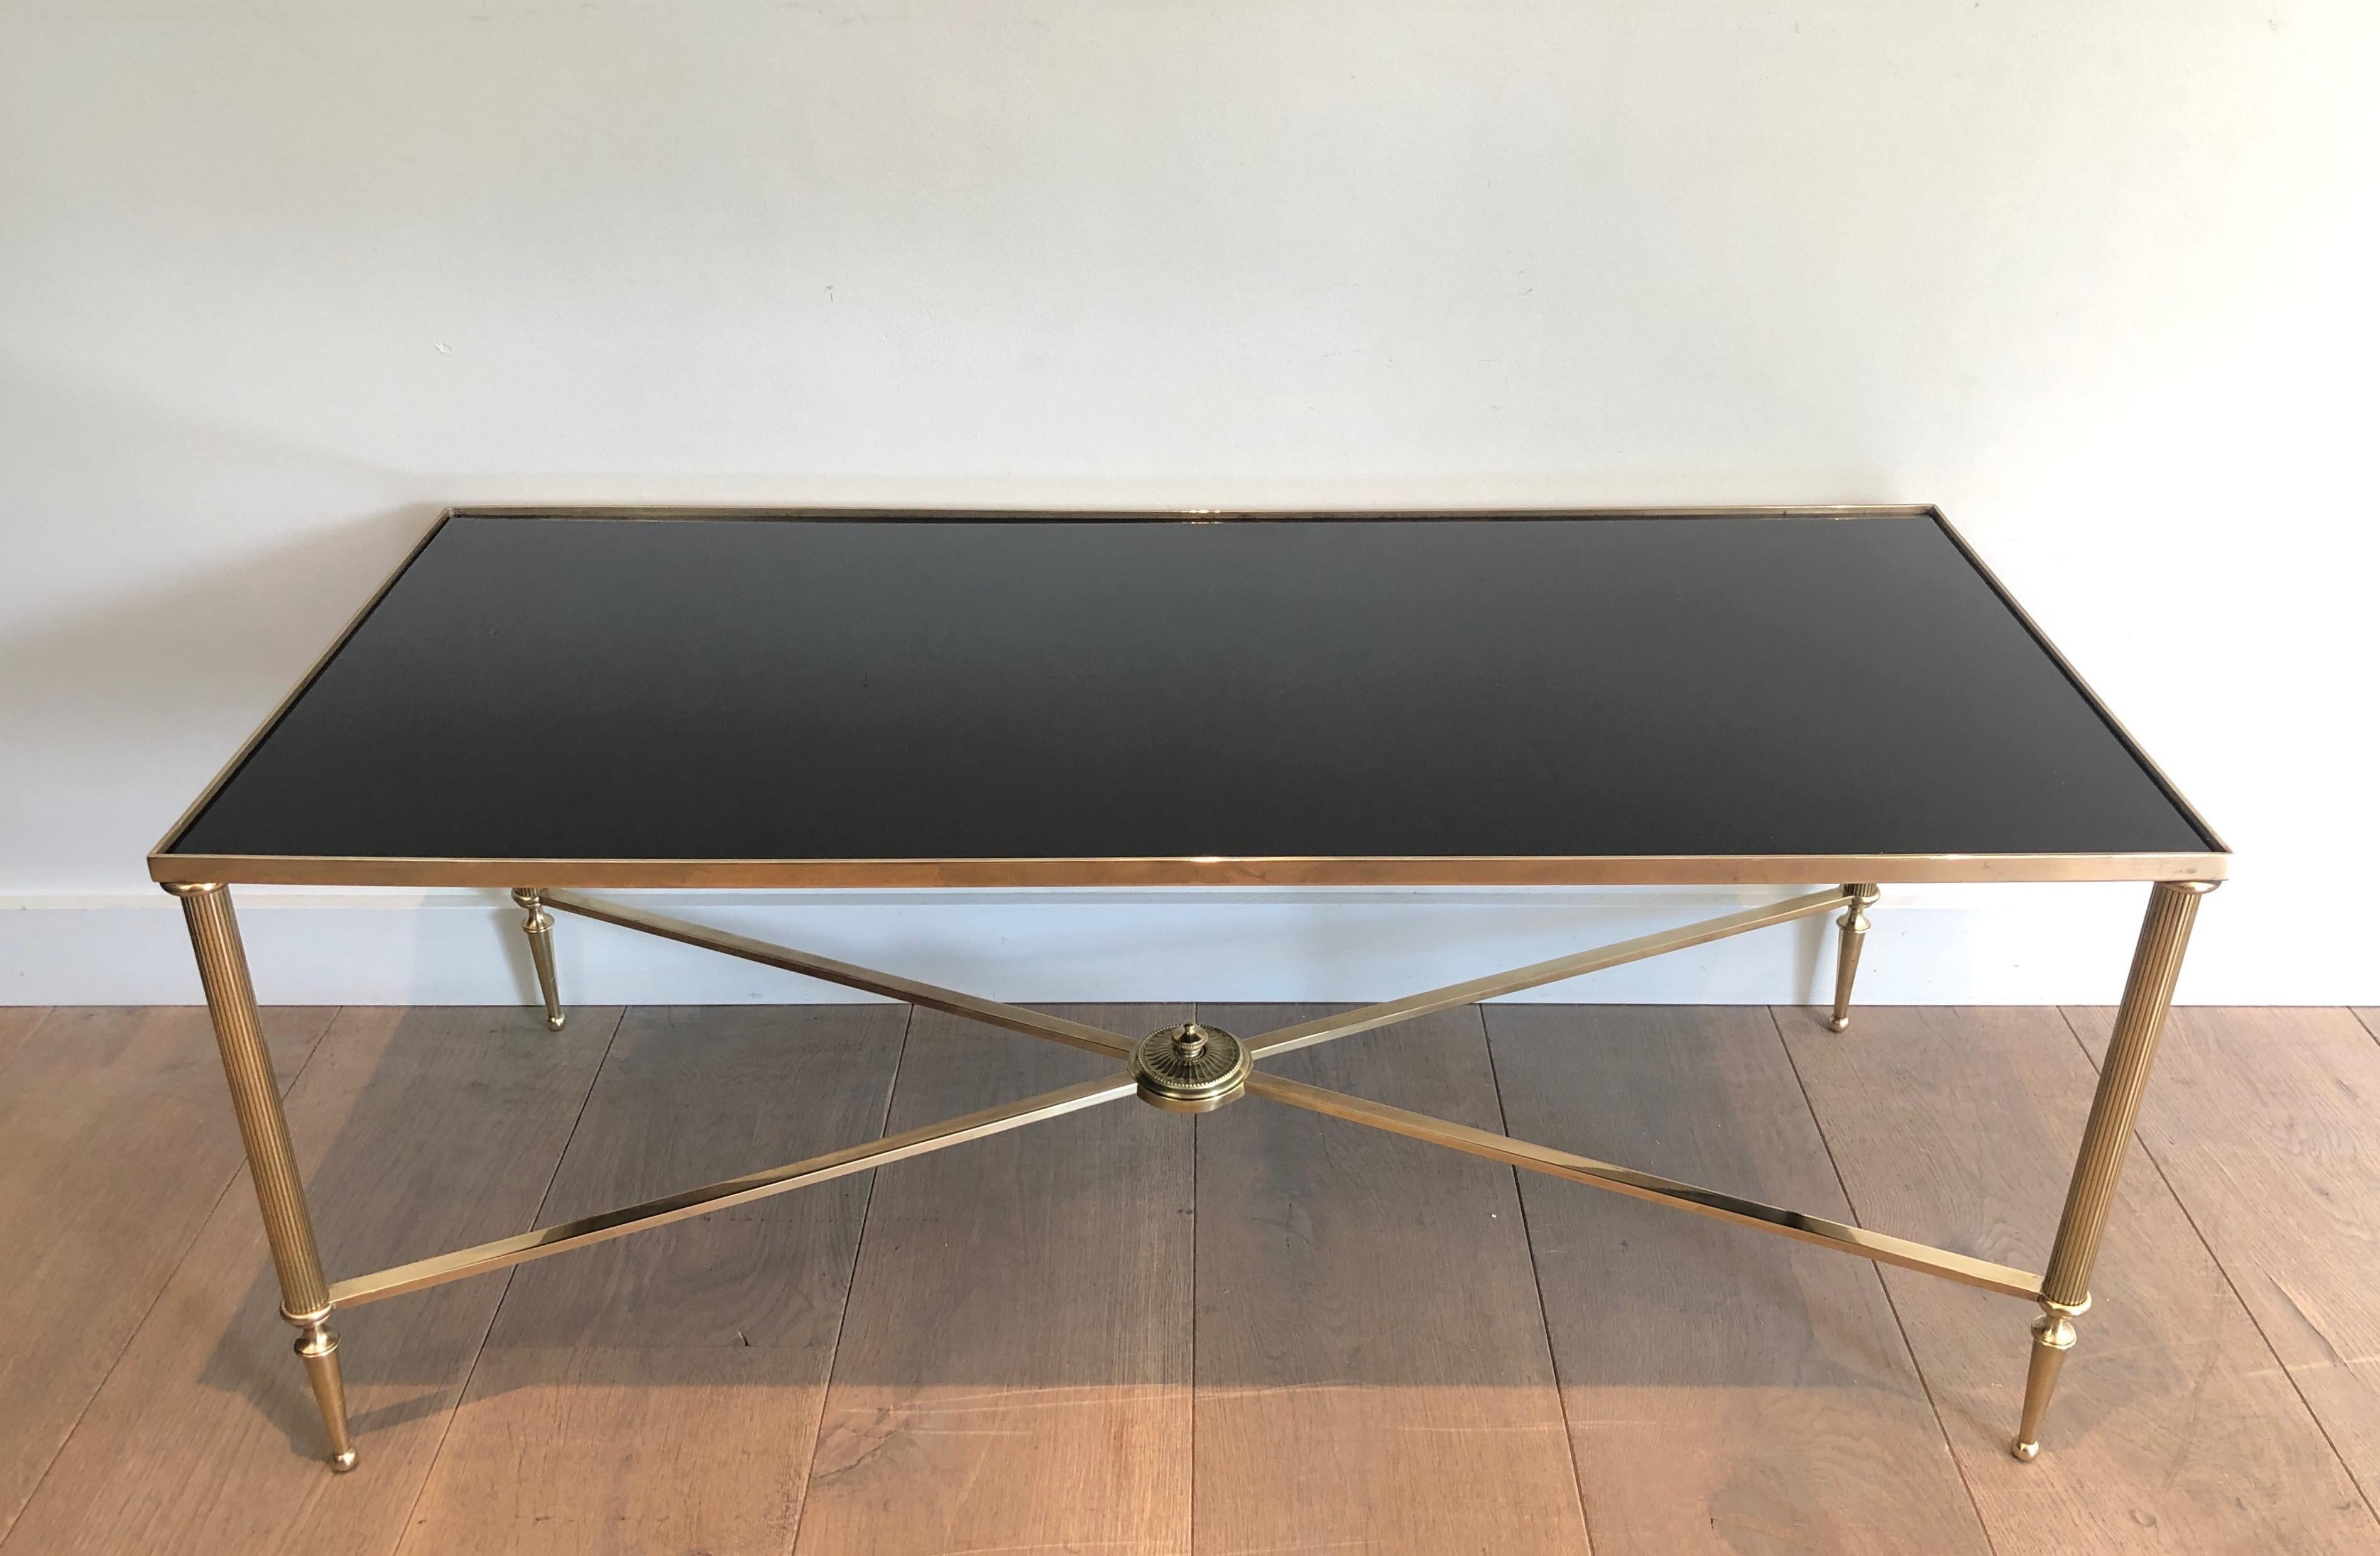 This neoclassical style coffee table is made of brass with a black lacquered glass top. This is a work by famous French designer Maison Jansen, circa 1940.